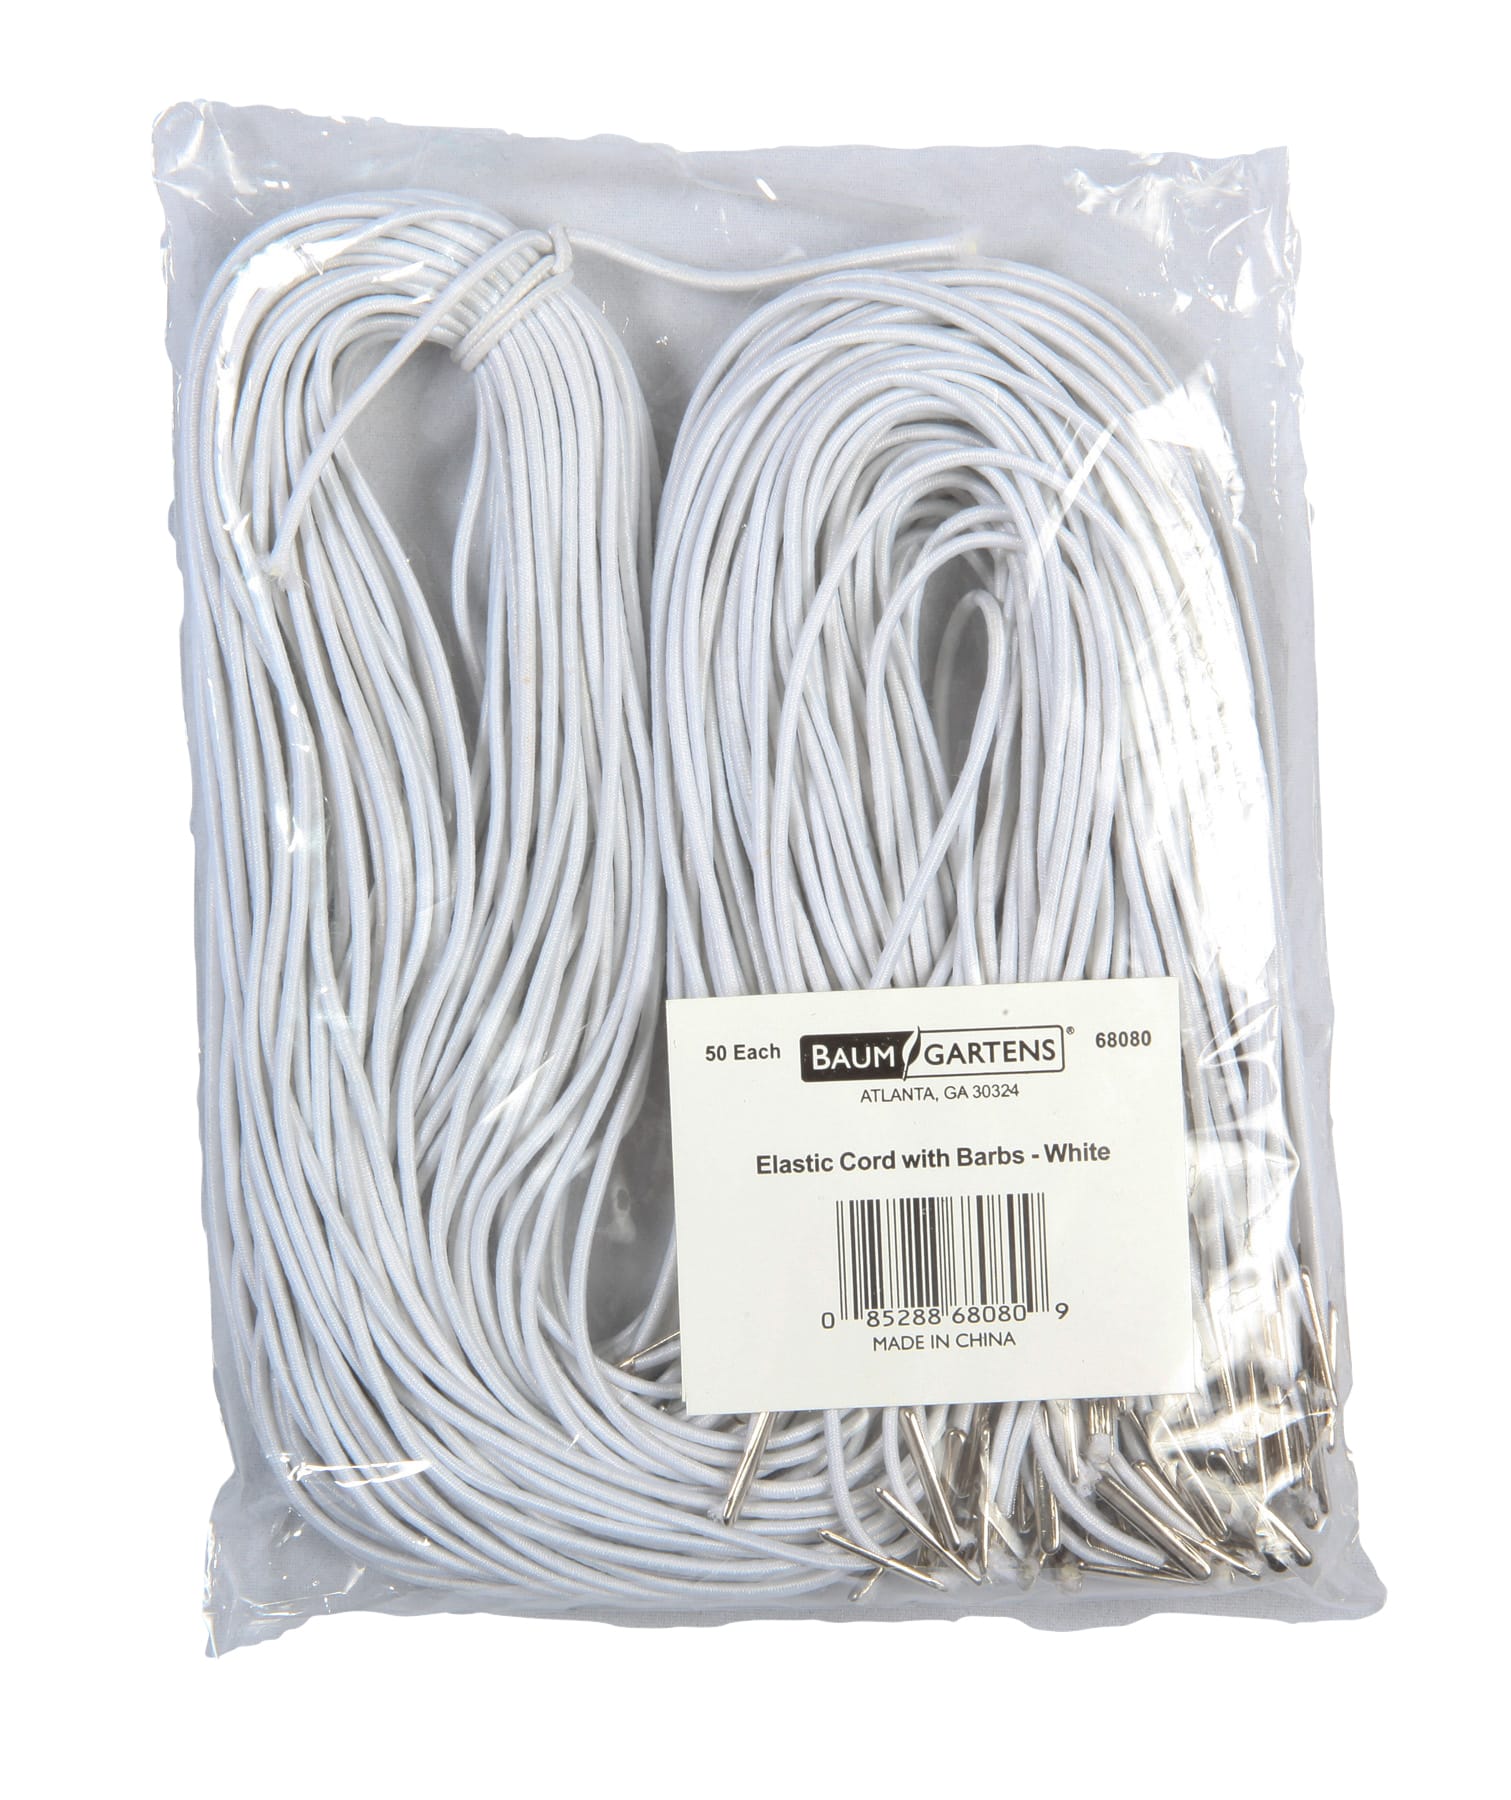  S&S Worldwide White Elastic Cord for Jewelry Making